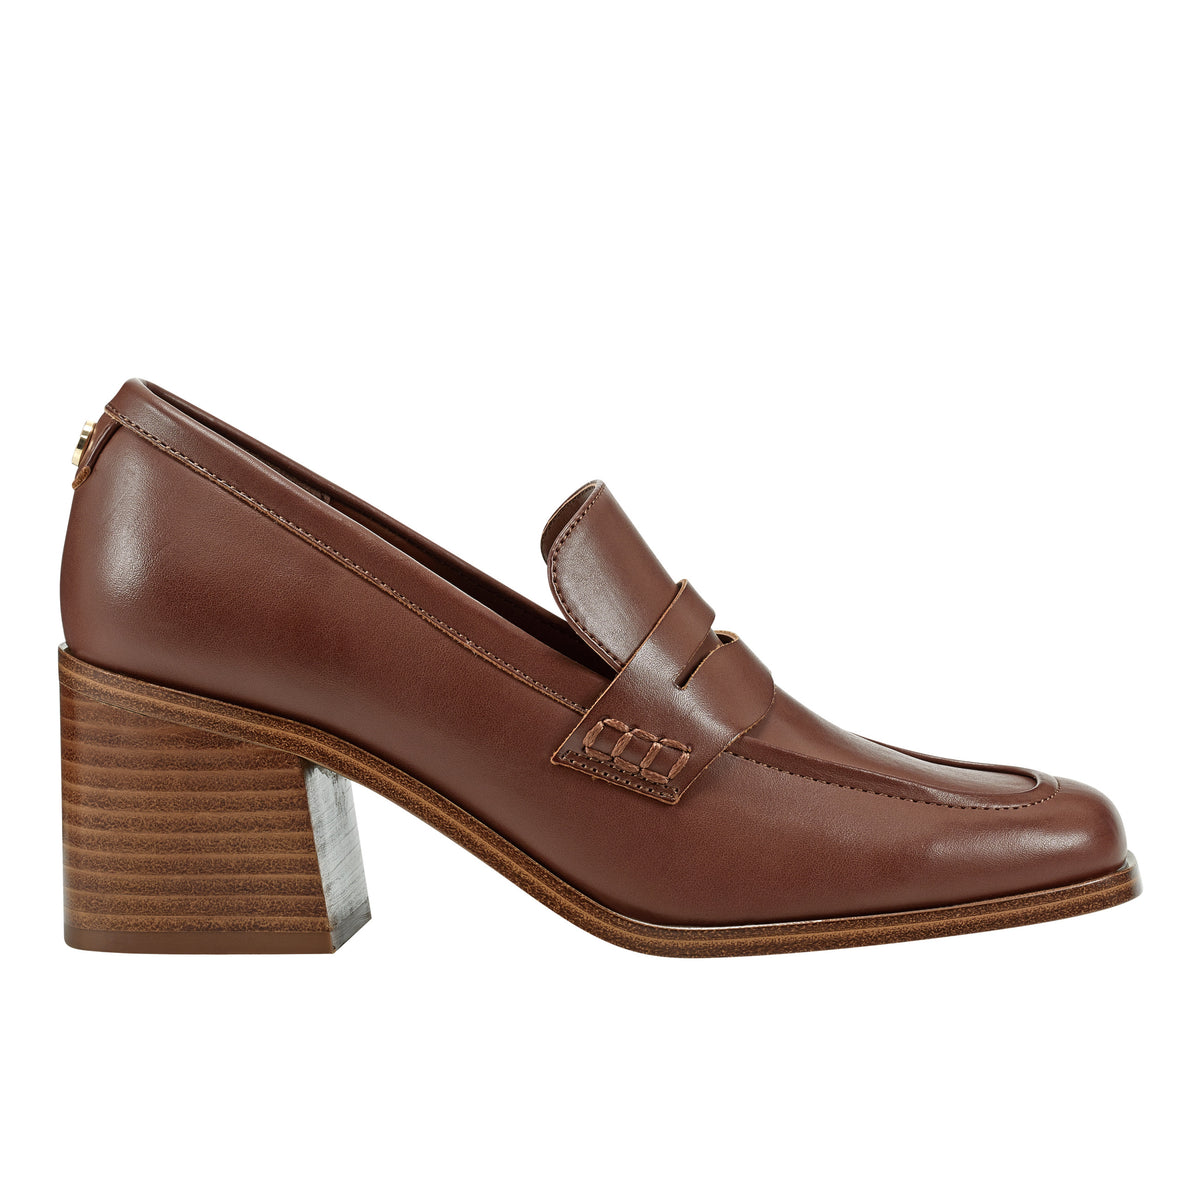 Prada Brushed Leather 85mm Heeled Loafers - Farfetch